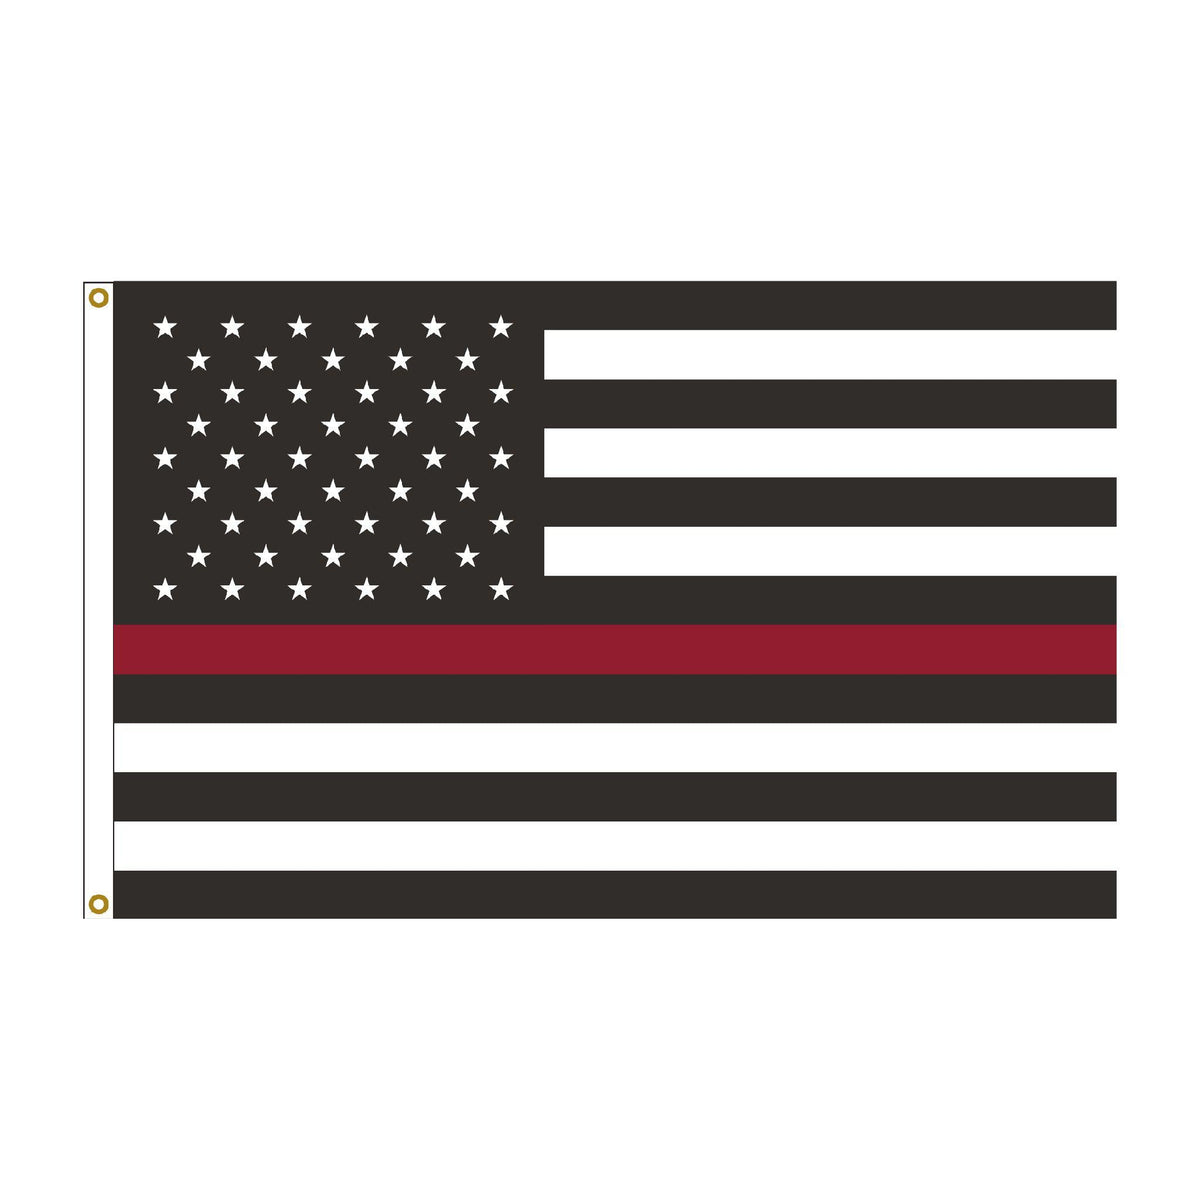 3x5 Thin Red Line U.S. flag with stars and stripes to support firefighters